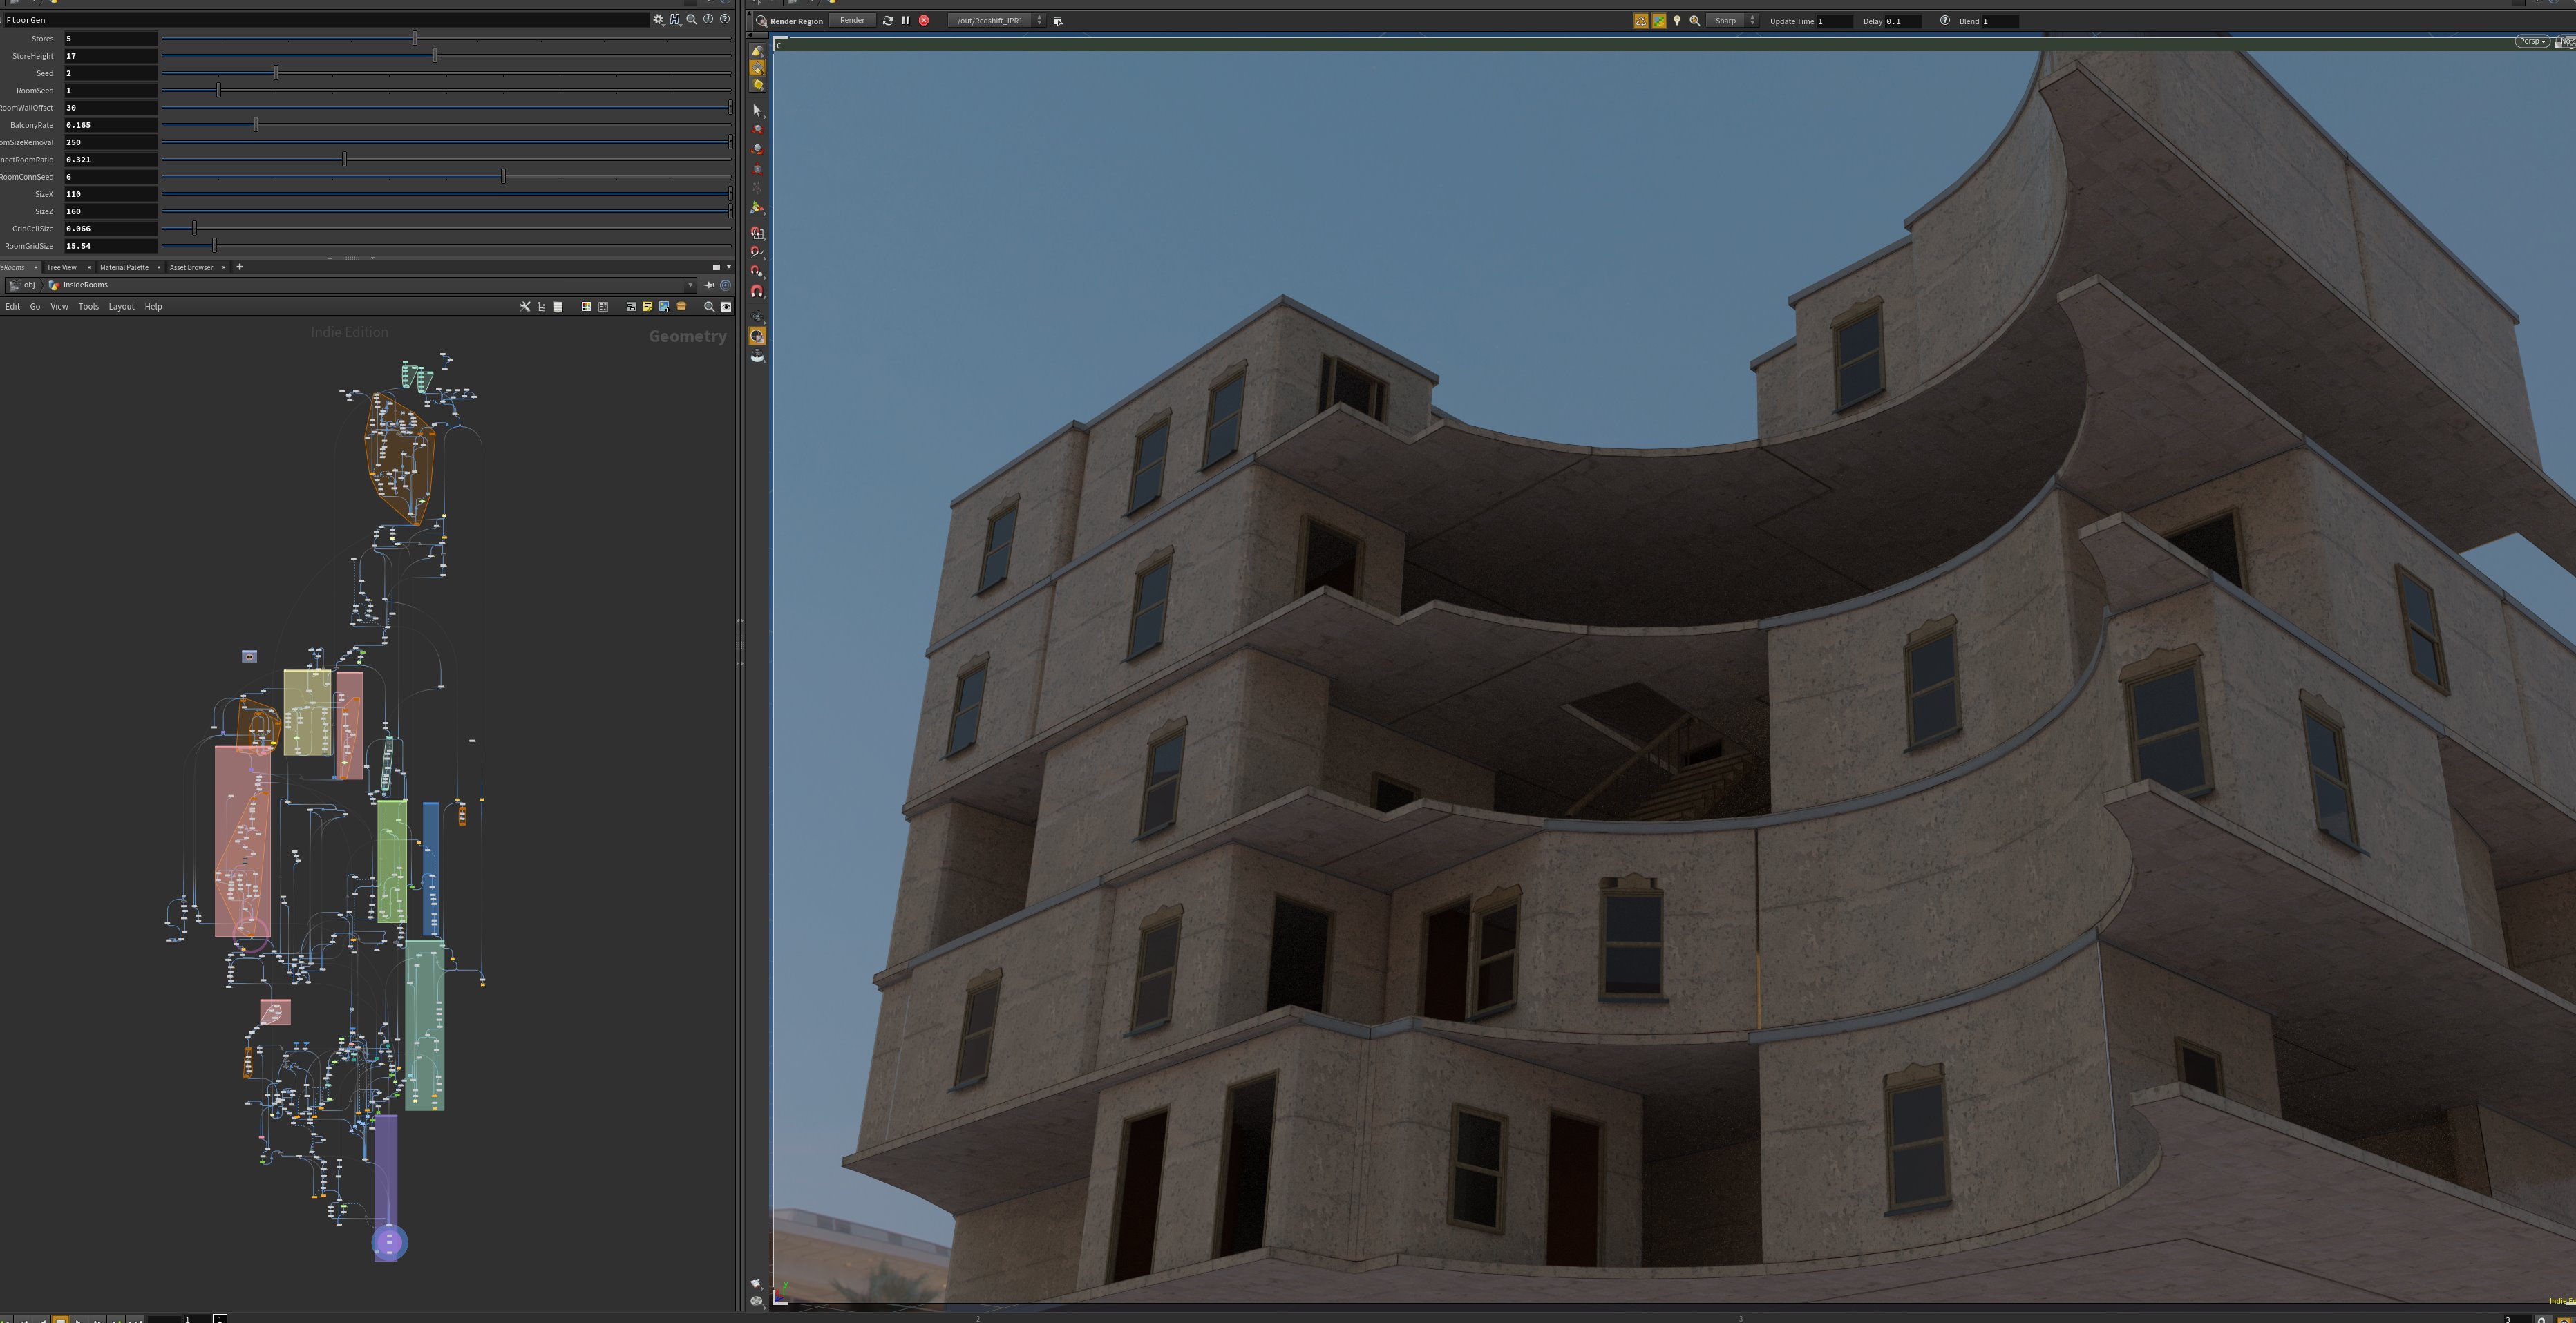 Santeri Oksanen on Twitter: "My #Houdini building generator now allow more  customizable shapes, random yaw stairways, point sprayed window-locations.  #Procedural #Redshift #Quixel #Megascans #Poliigon HDR. WIP still bugs to  beat/details to add.